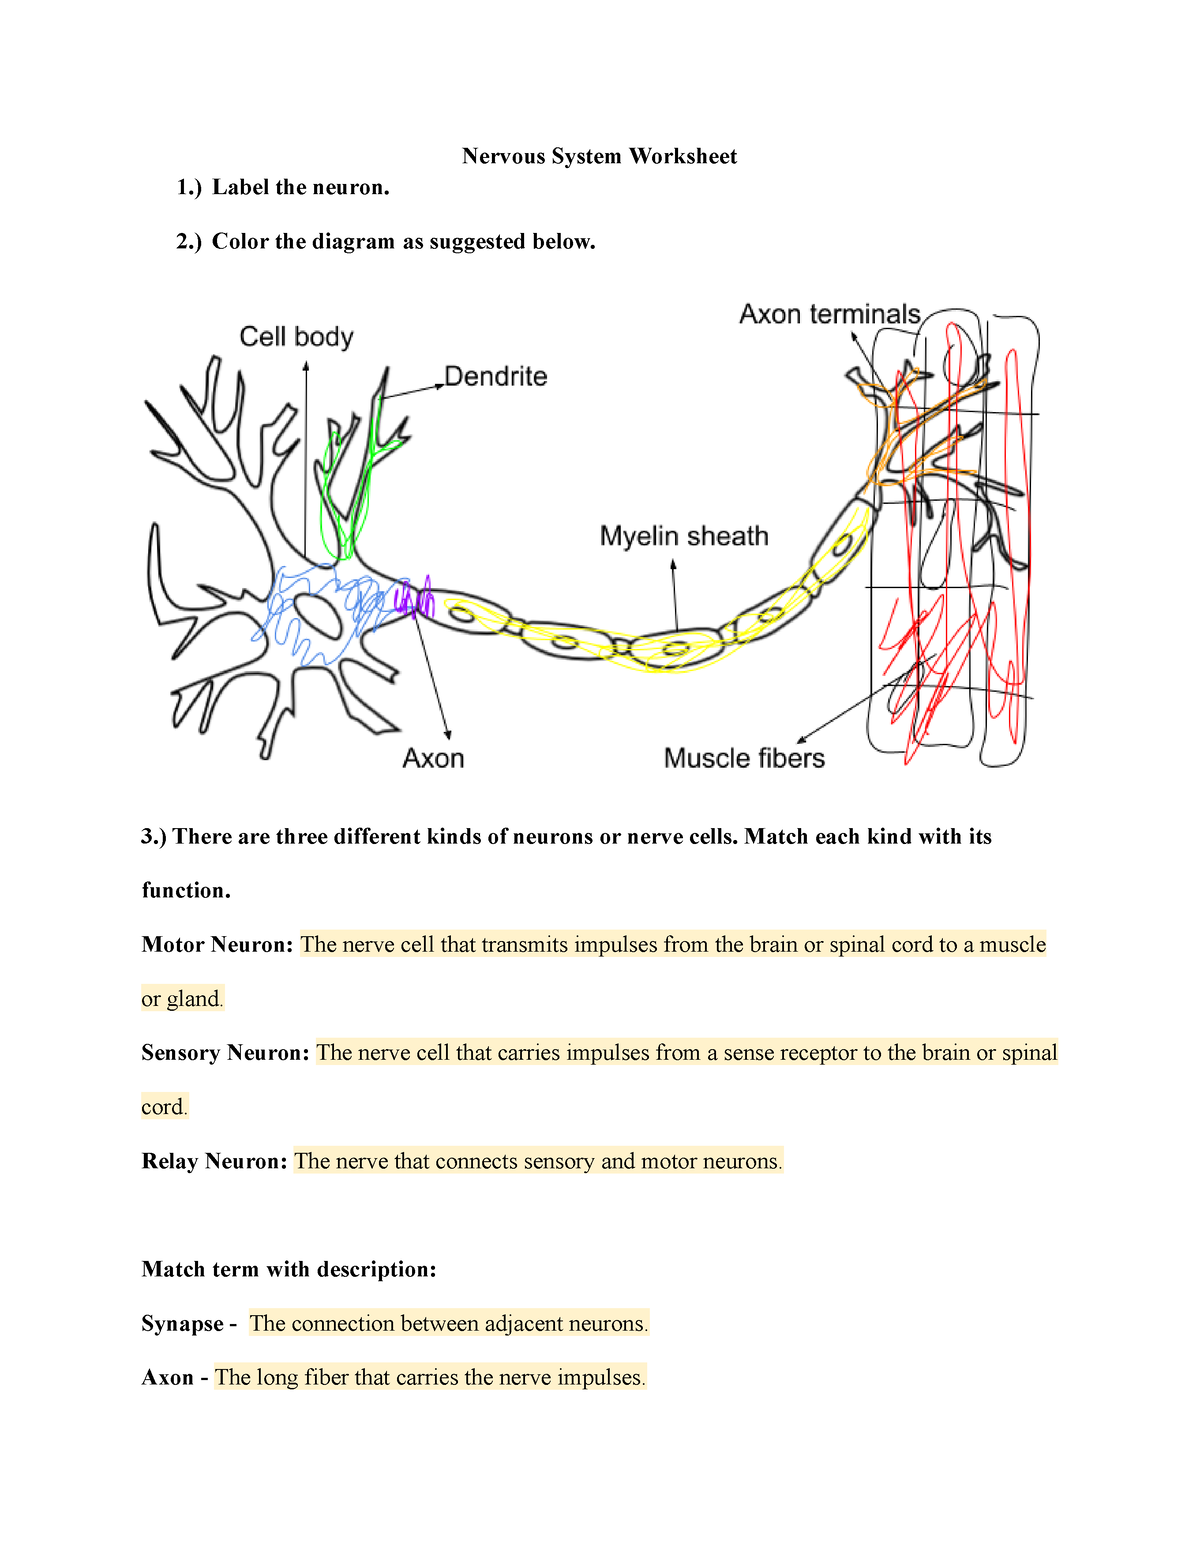 nervous-system-worksheet-nervous-system-worksheet-1-label-the